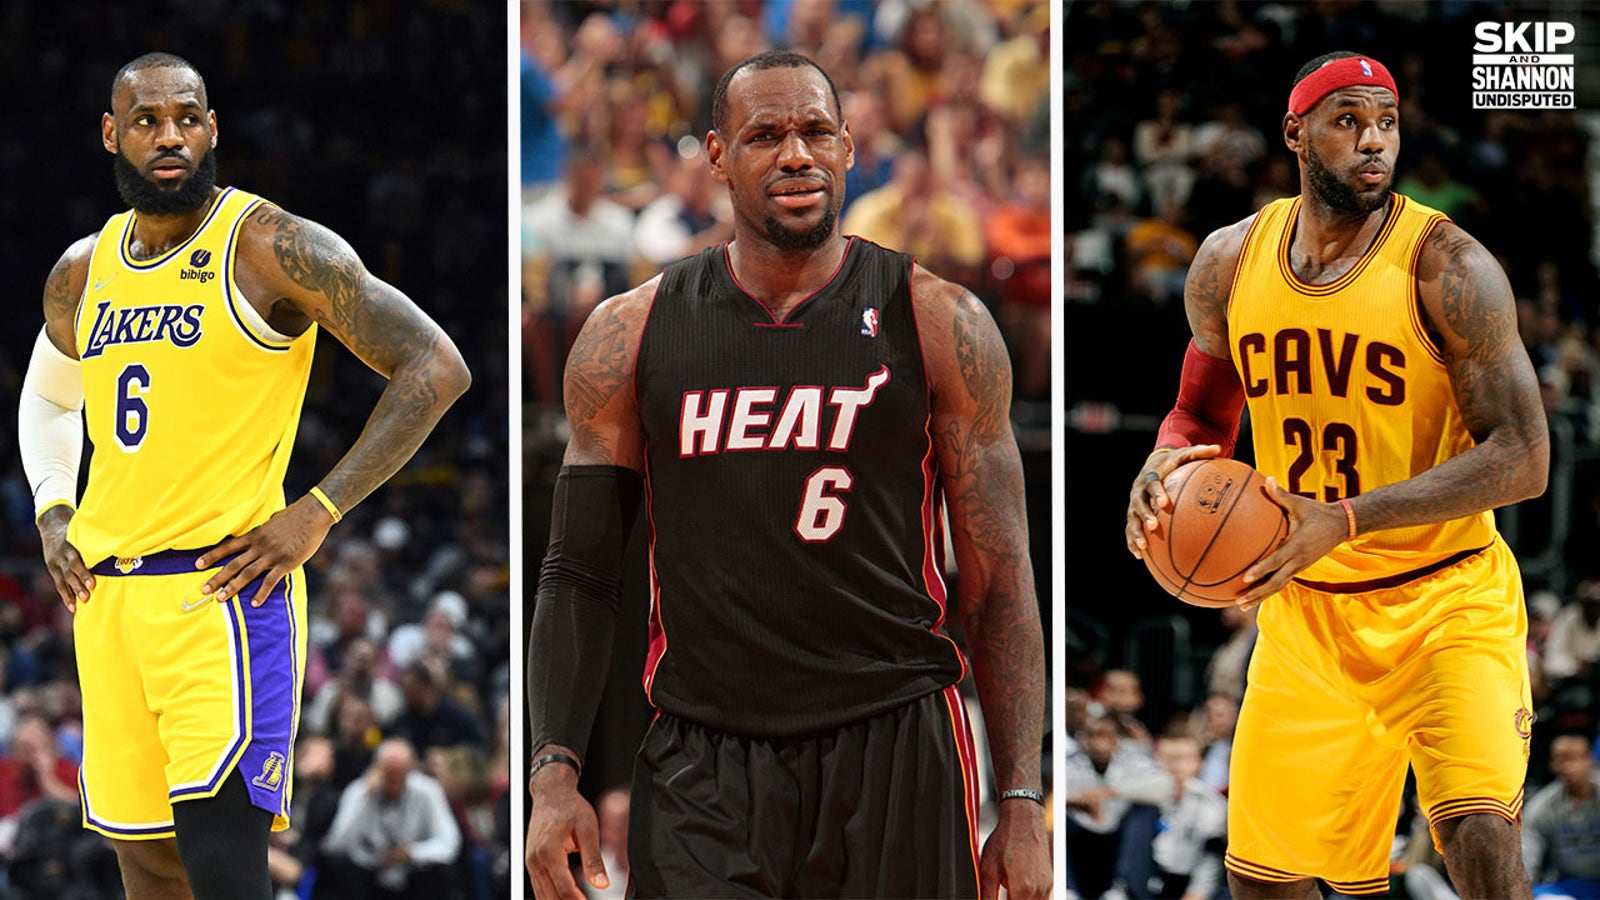 Which is the best version of LeBron: Cleveland, Miami, or L.A.?